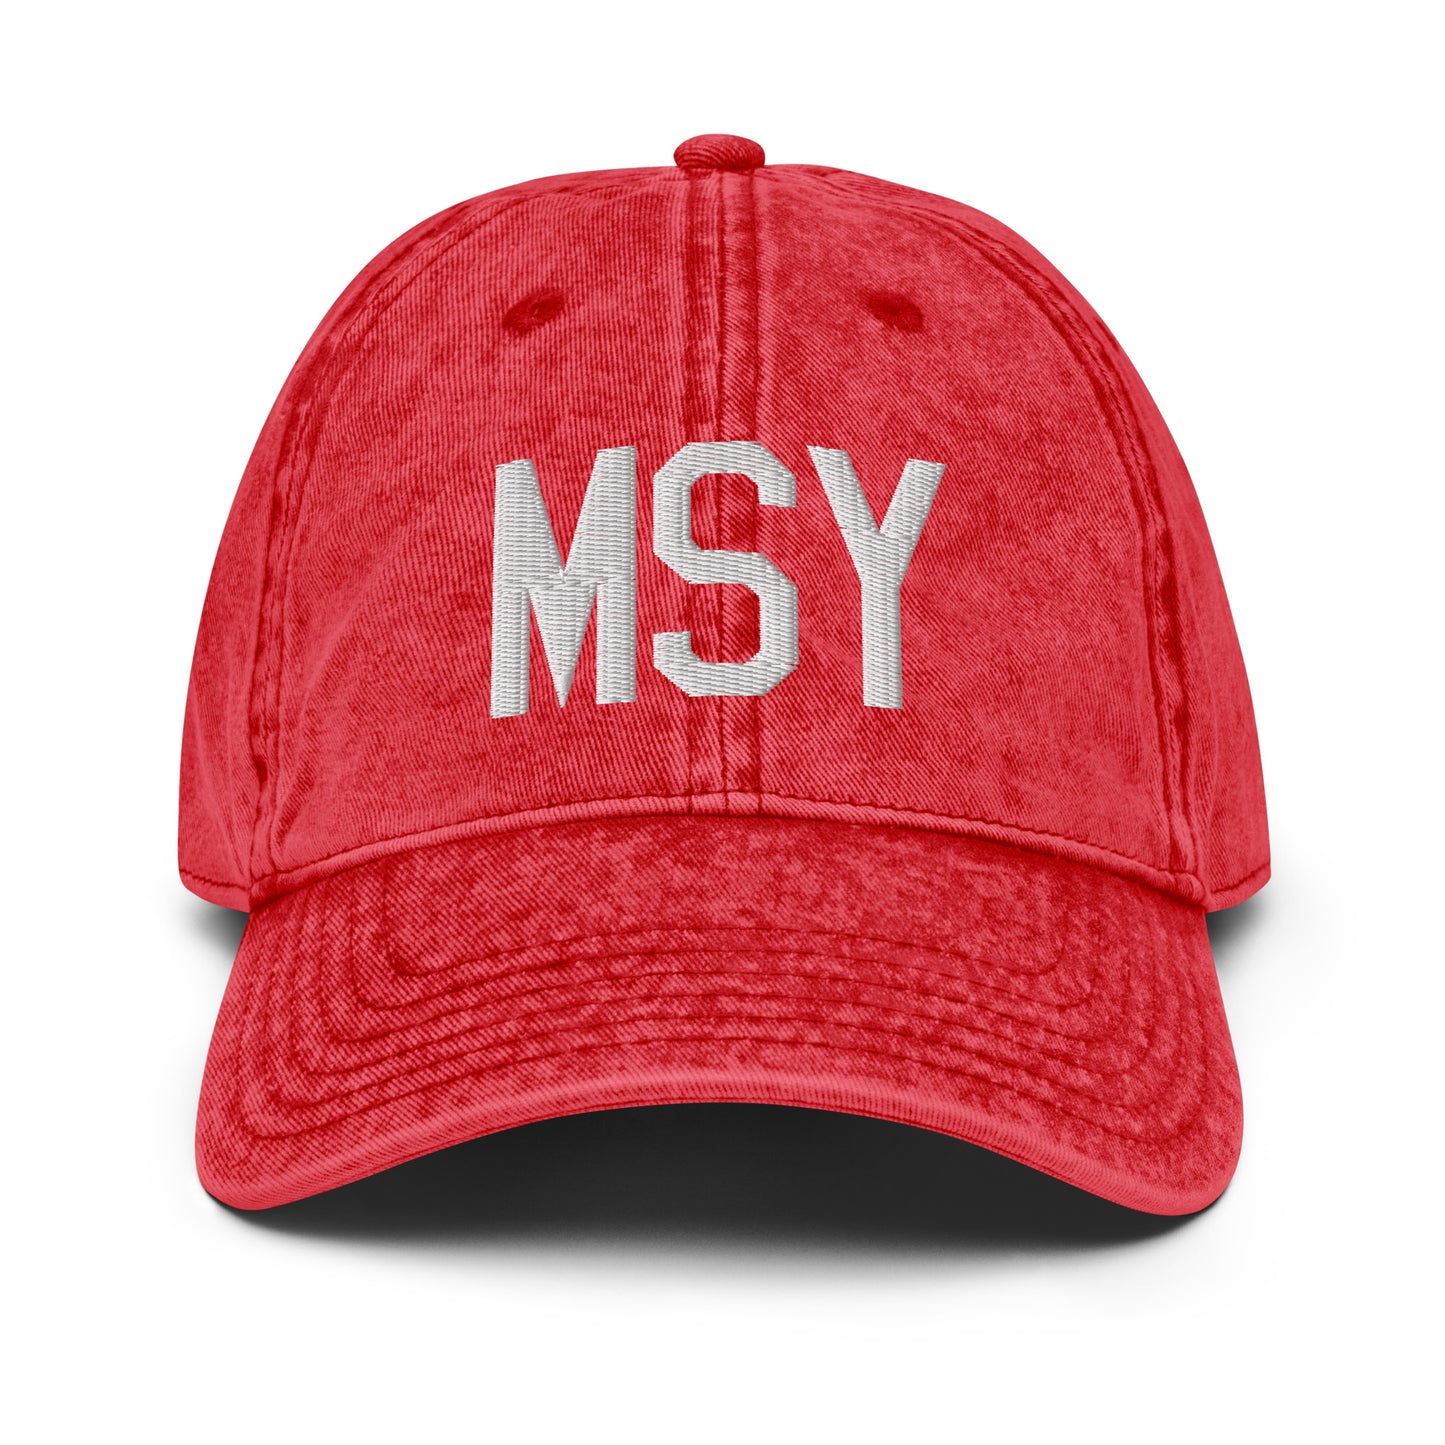 Airport Code Twill Cap - White • MSY New Orleans • YHM Designs - Image 22